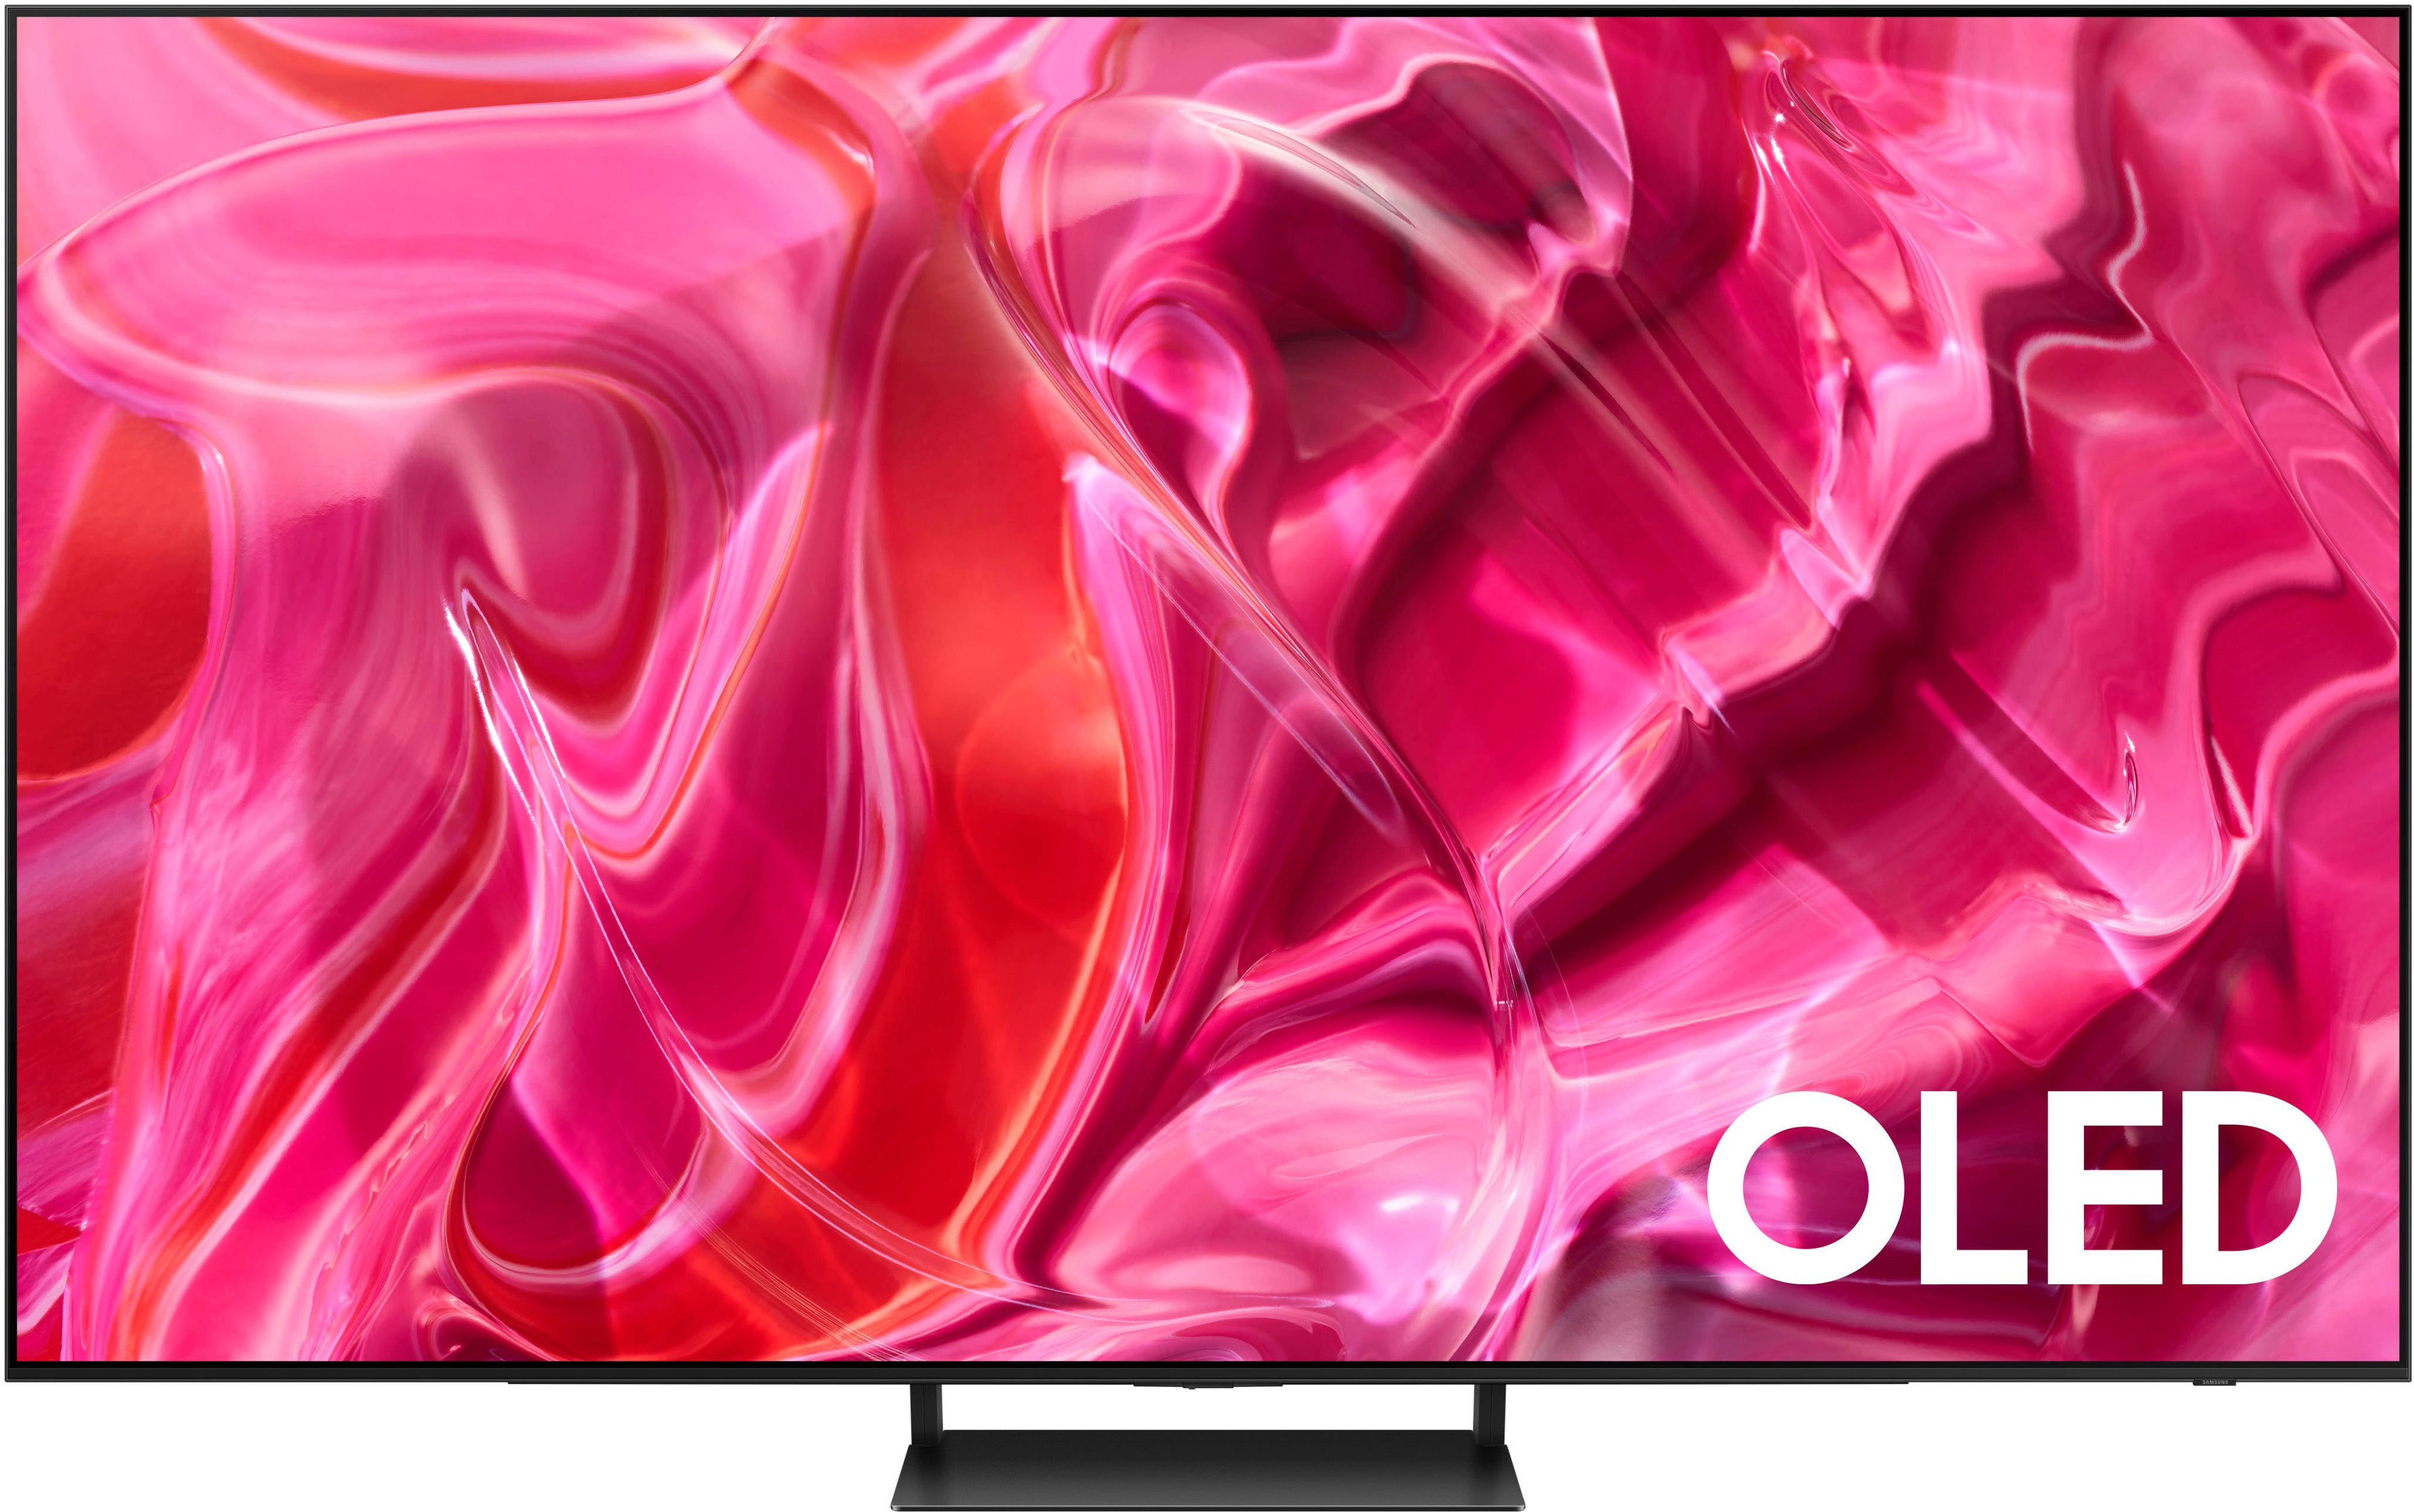 4K 120Hz with VRR is coming to some 2021 Philips TVs